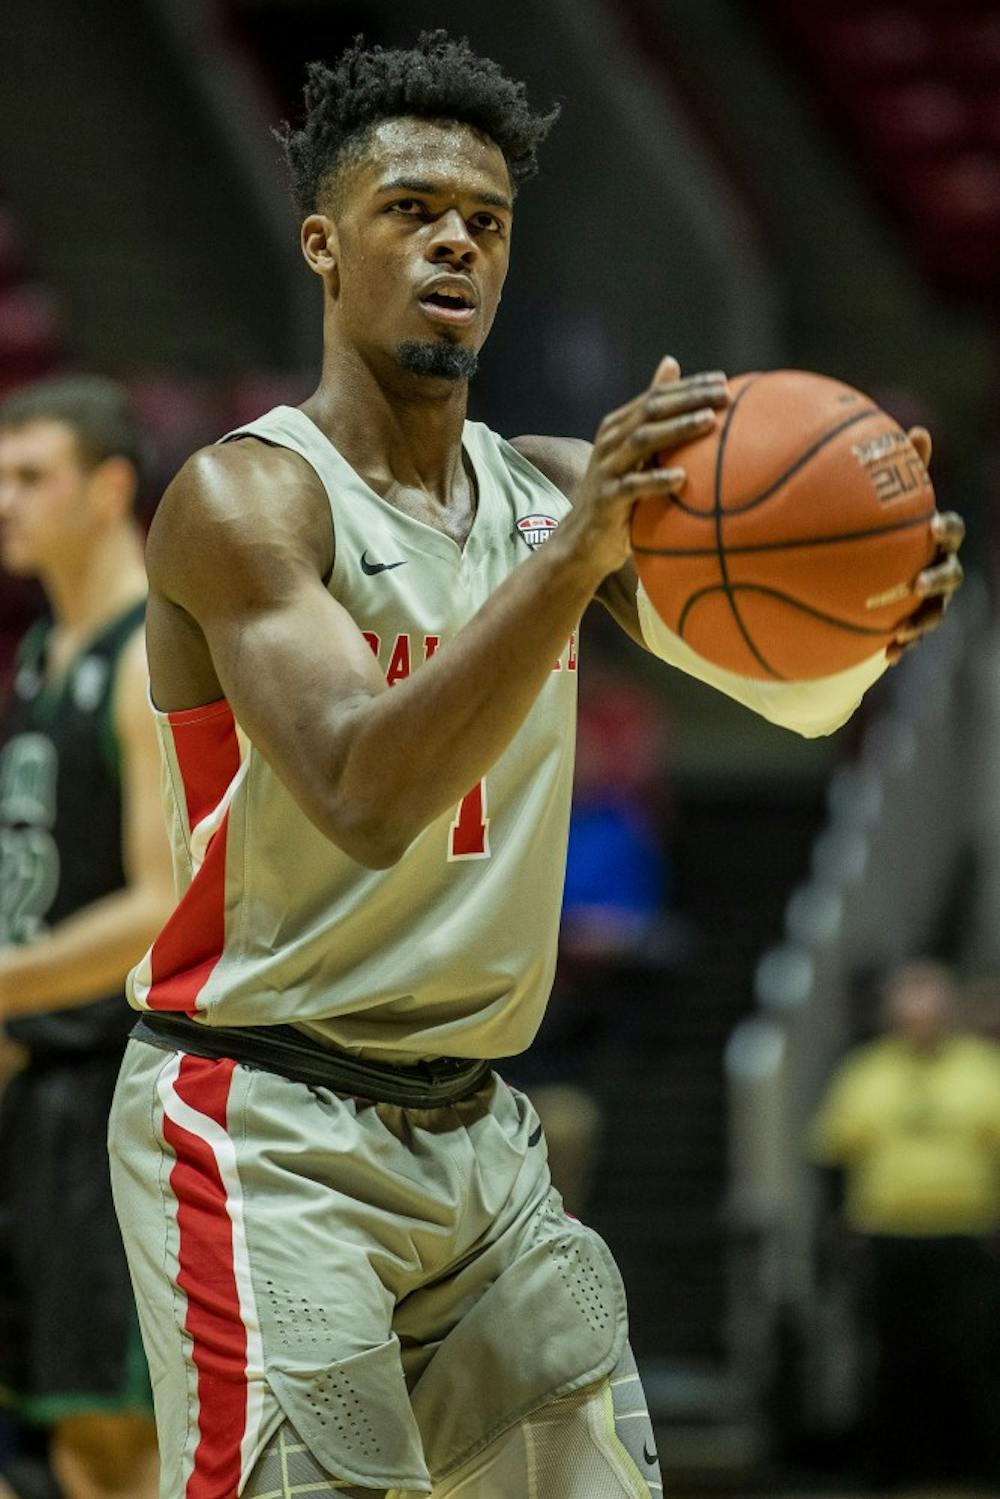 Team improvement not enough to lift Ball State Men's Basketball over Bowling Green